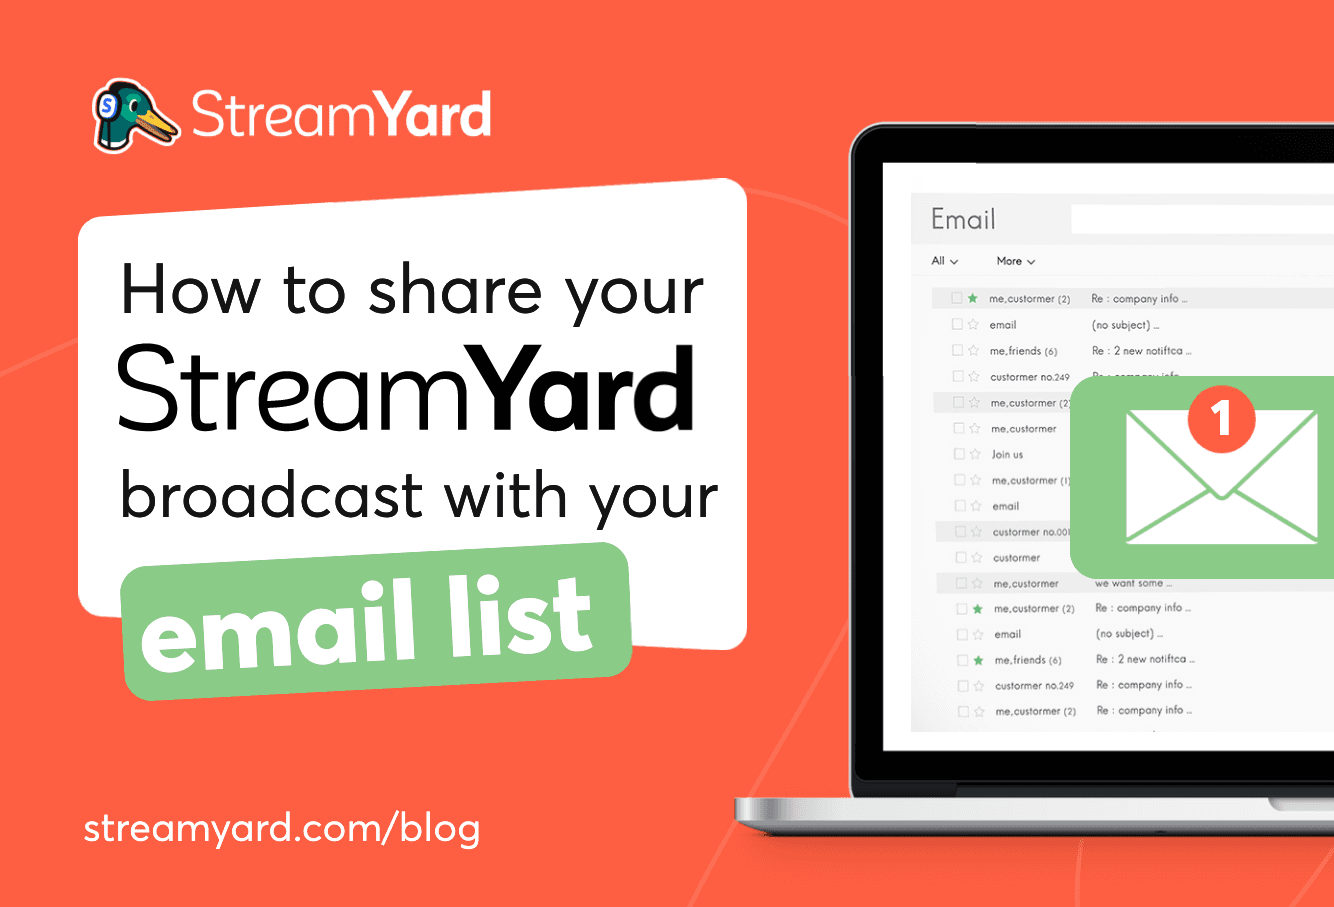 Learn how to share your StreamYard broadcast with your email list to grow your viewership.